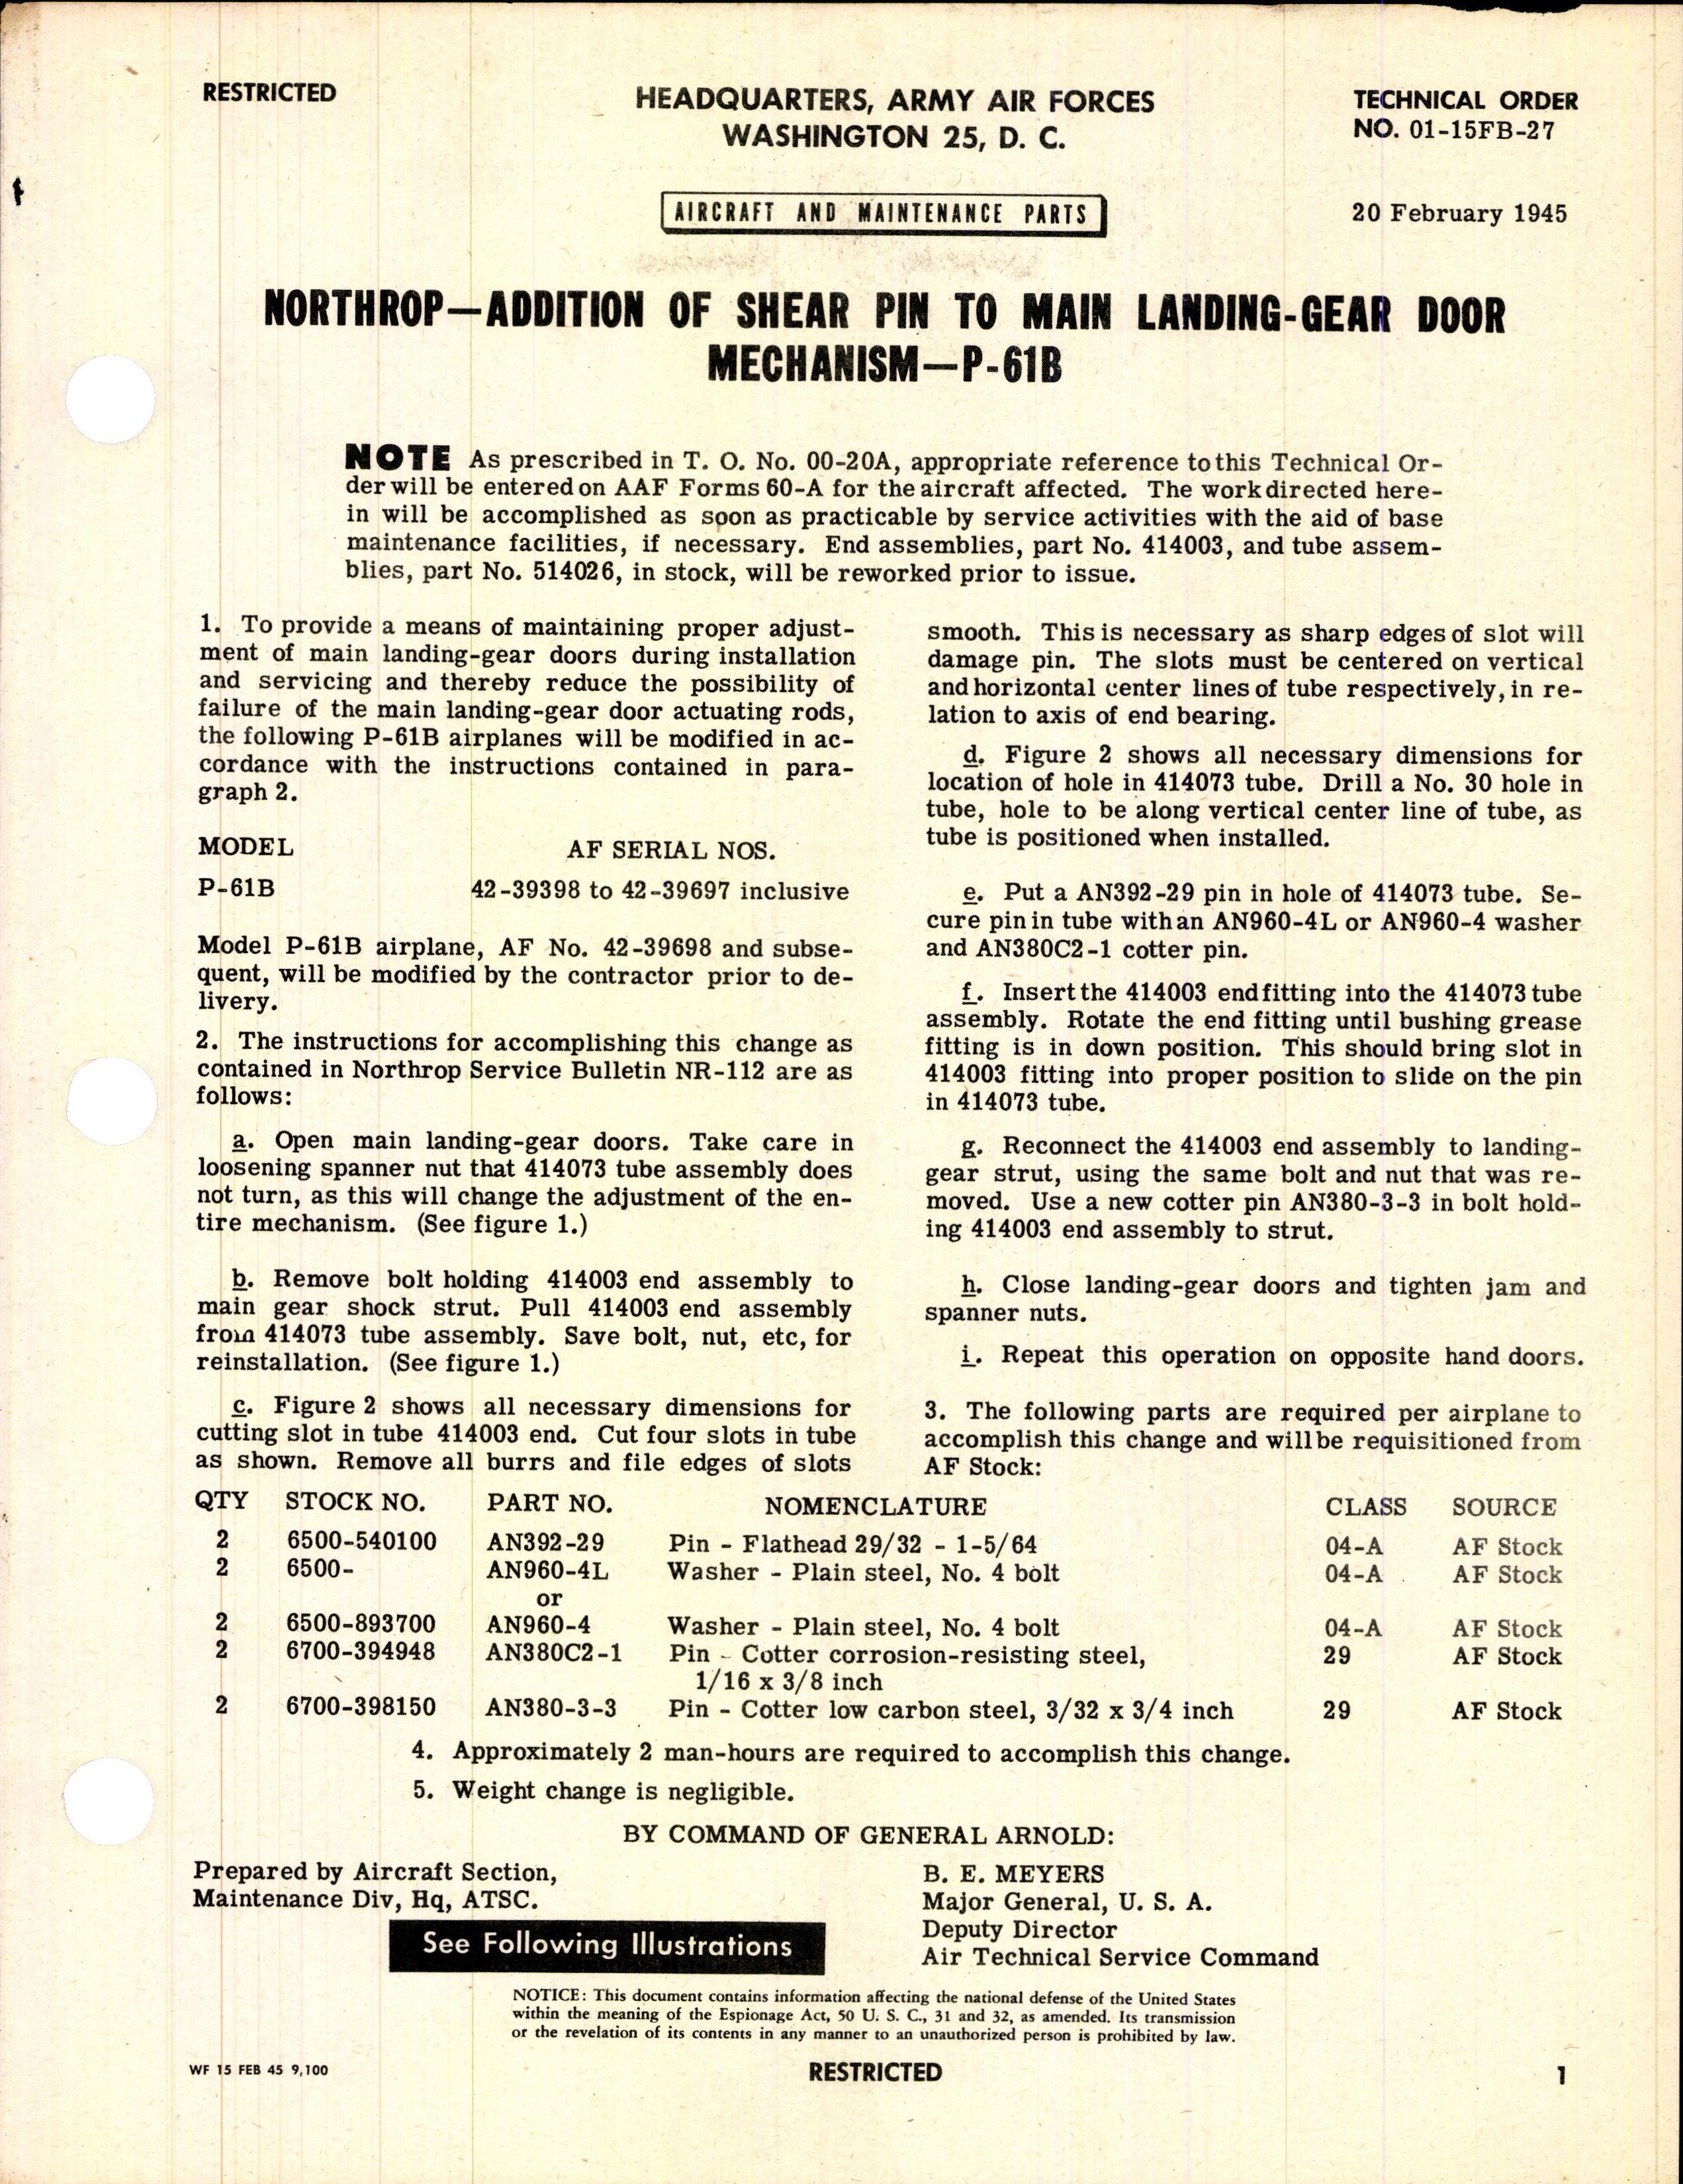 Sample page 1 from AirCorps Library document: Addition of Shear Pin to Main Landing-Gear Door Mechanism for P-61B